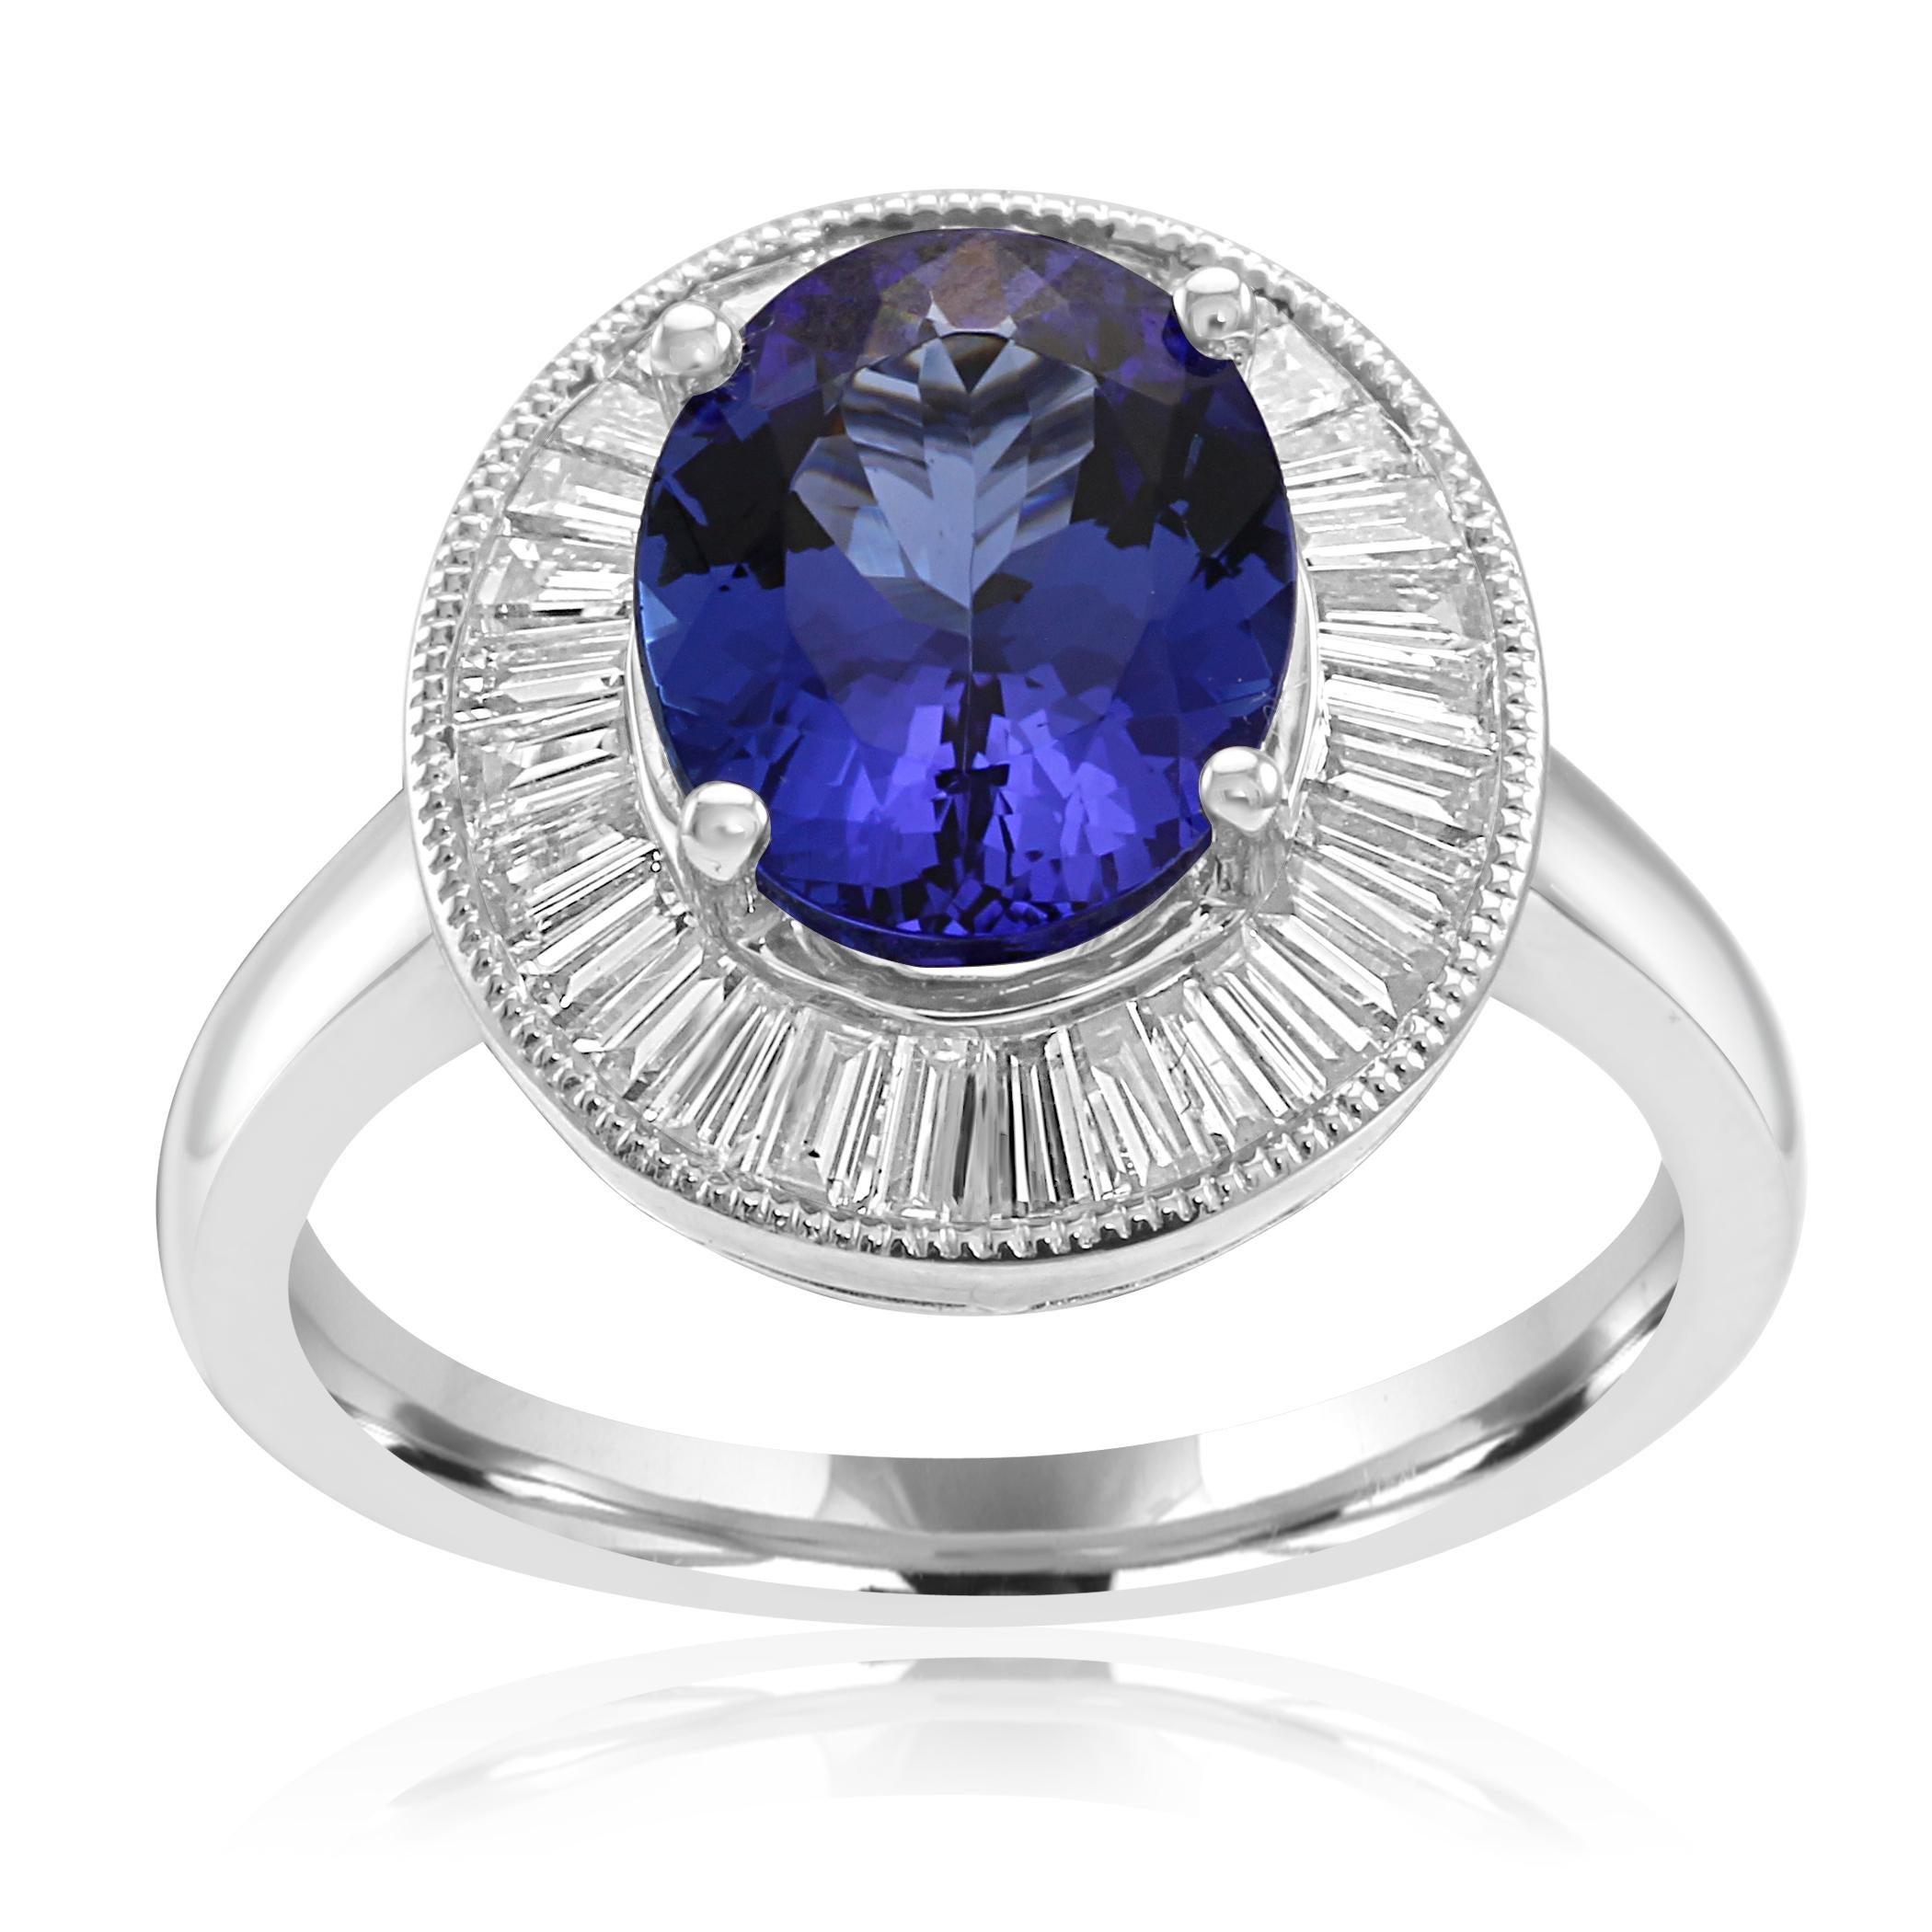 Stunning Art Deco Style Tanzanite Oval 2.77 Carat Encircled in a Single Halo of White G-H Color VS Clarity Diamond Baguette 0.80 Carat with nice filigree work on the side in 18K White Gold Bridal Fashion Cocktail Ring. Total Weight 3.57